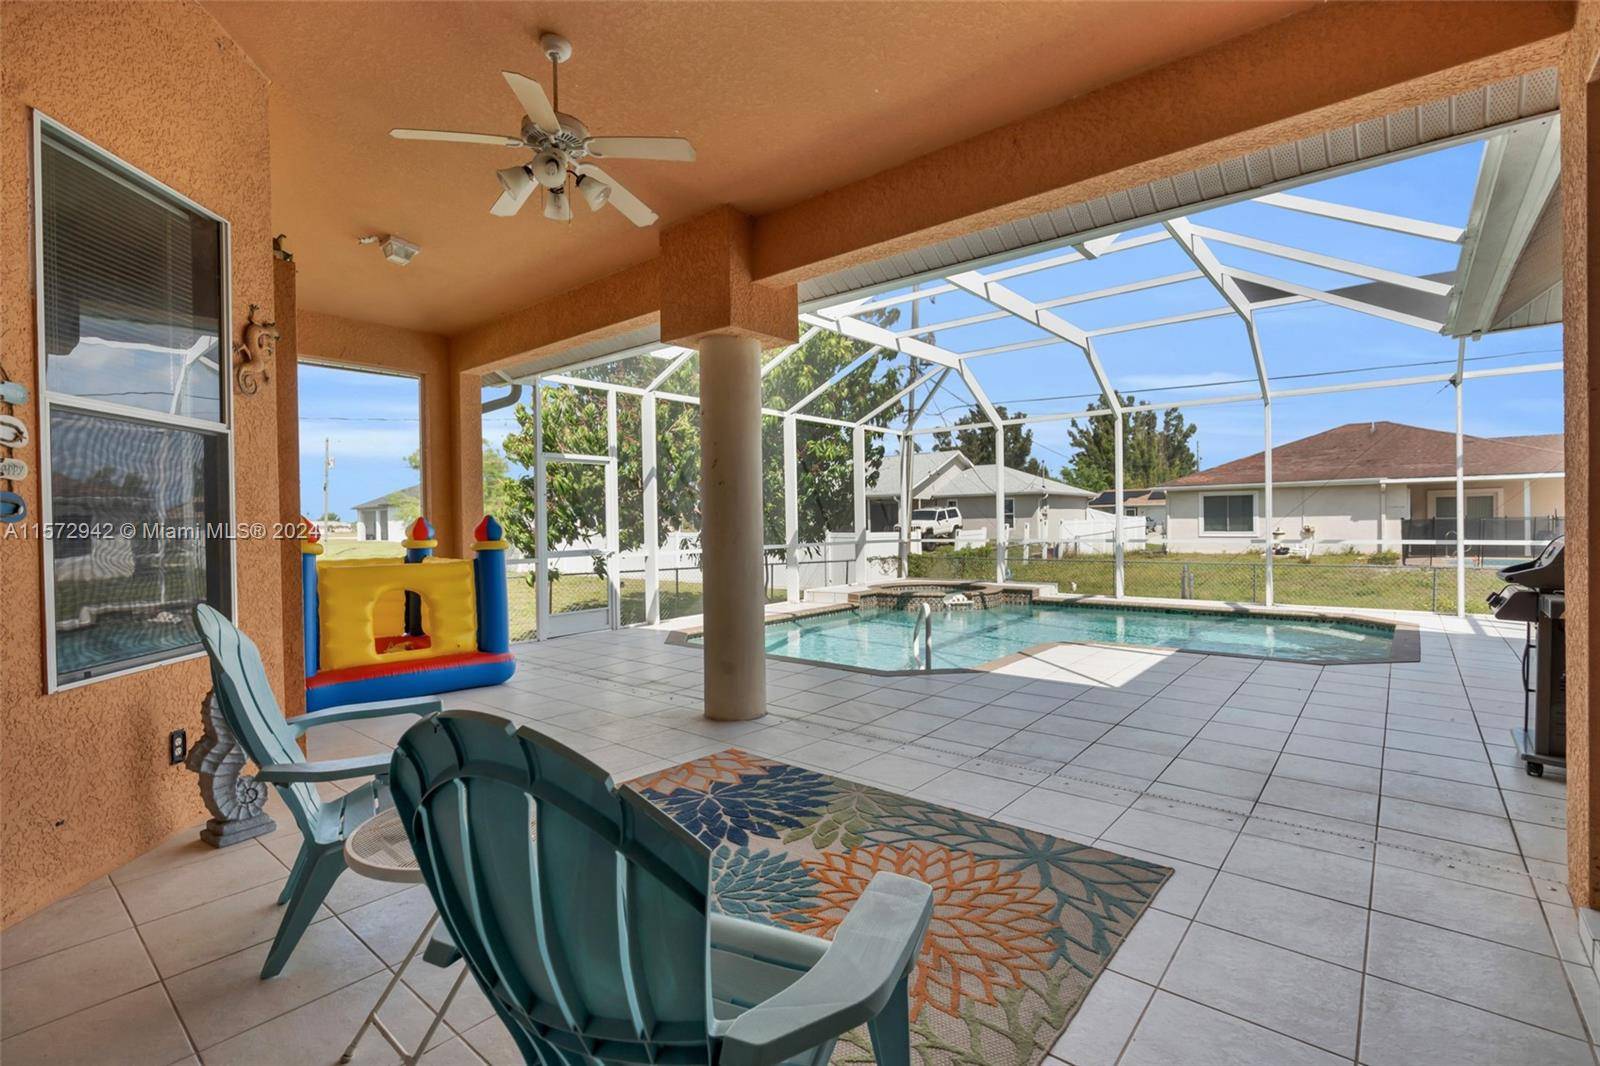 Welcome to your oasis ! This beautiful 3 bedroom plus den, 3 bathroom, 2400 sq.